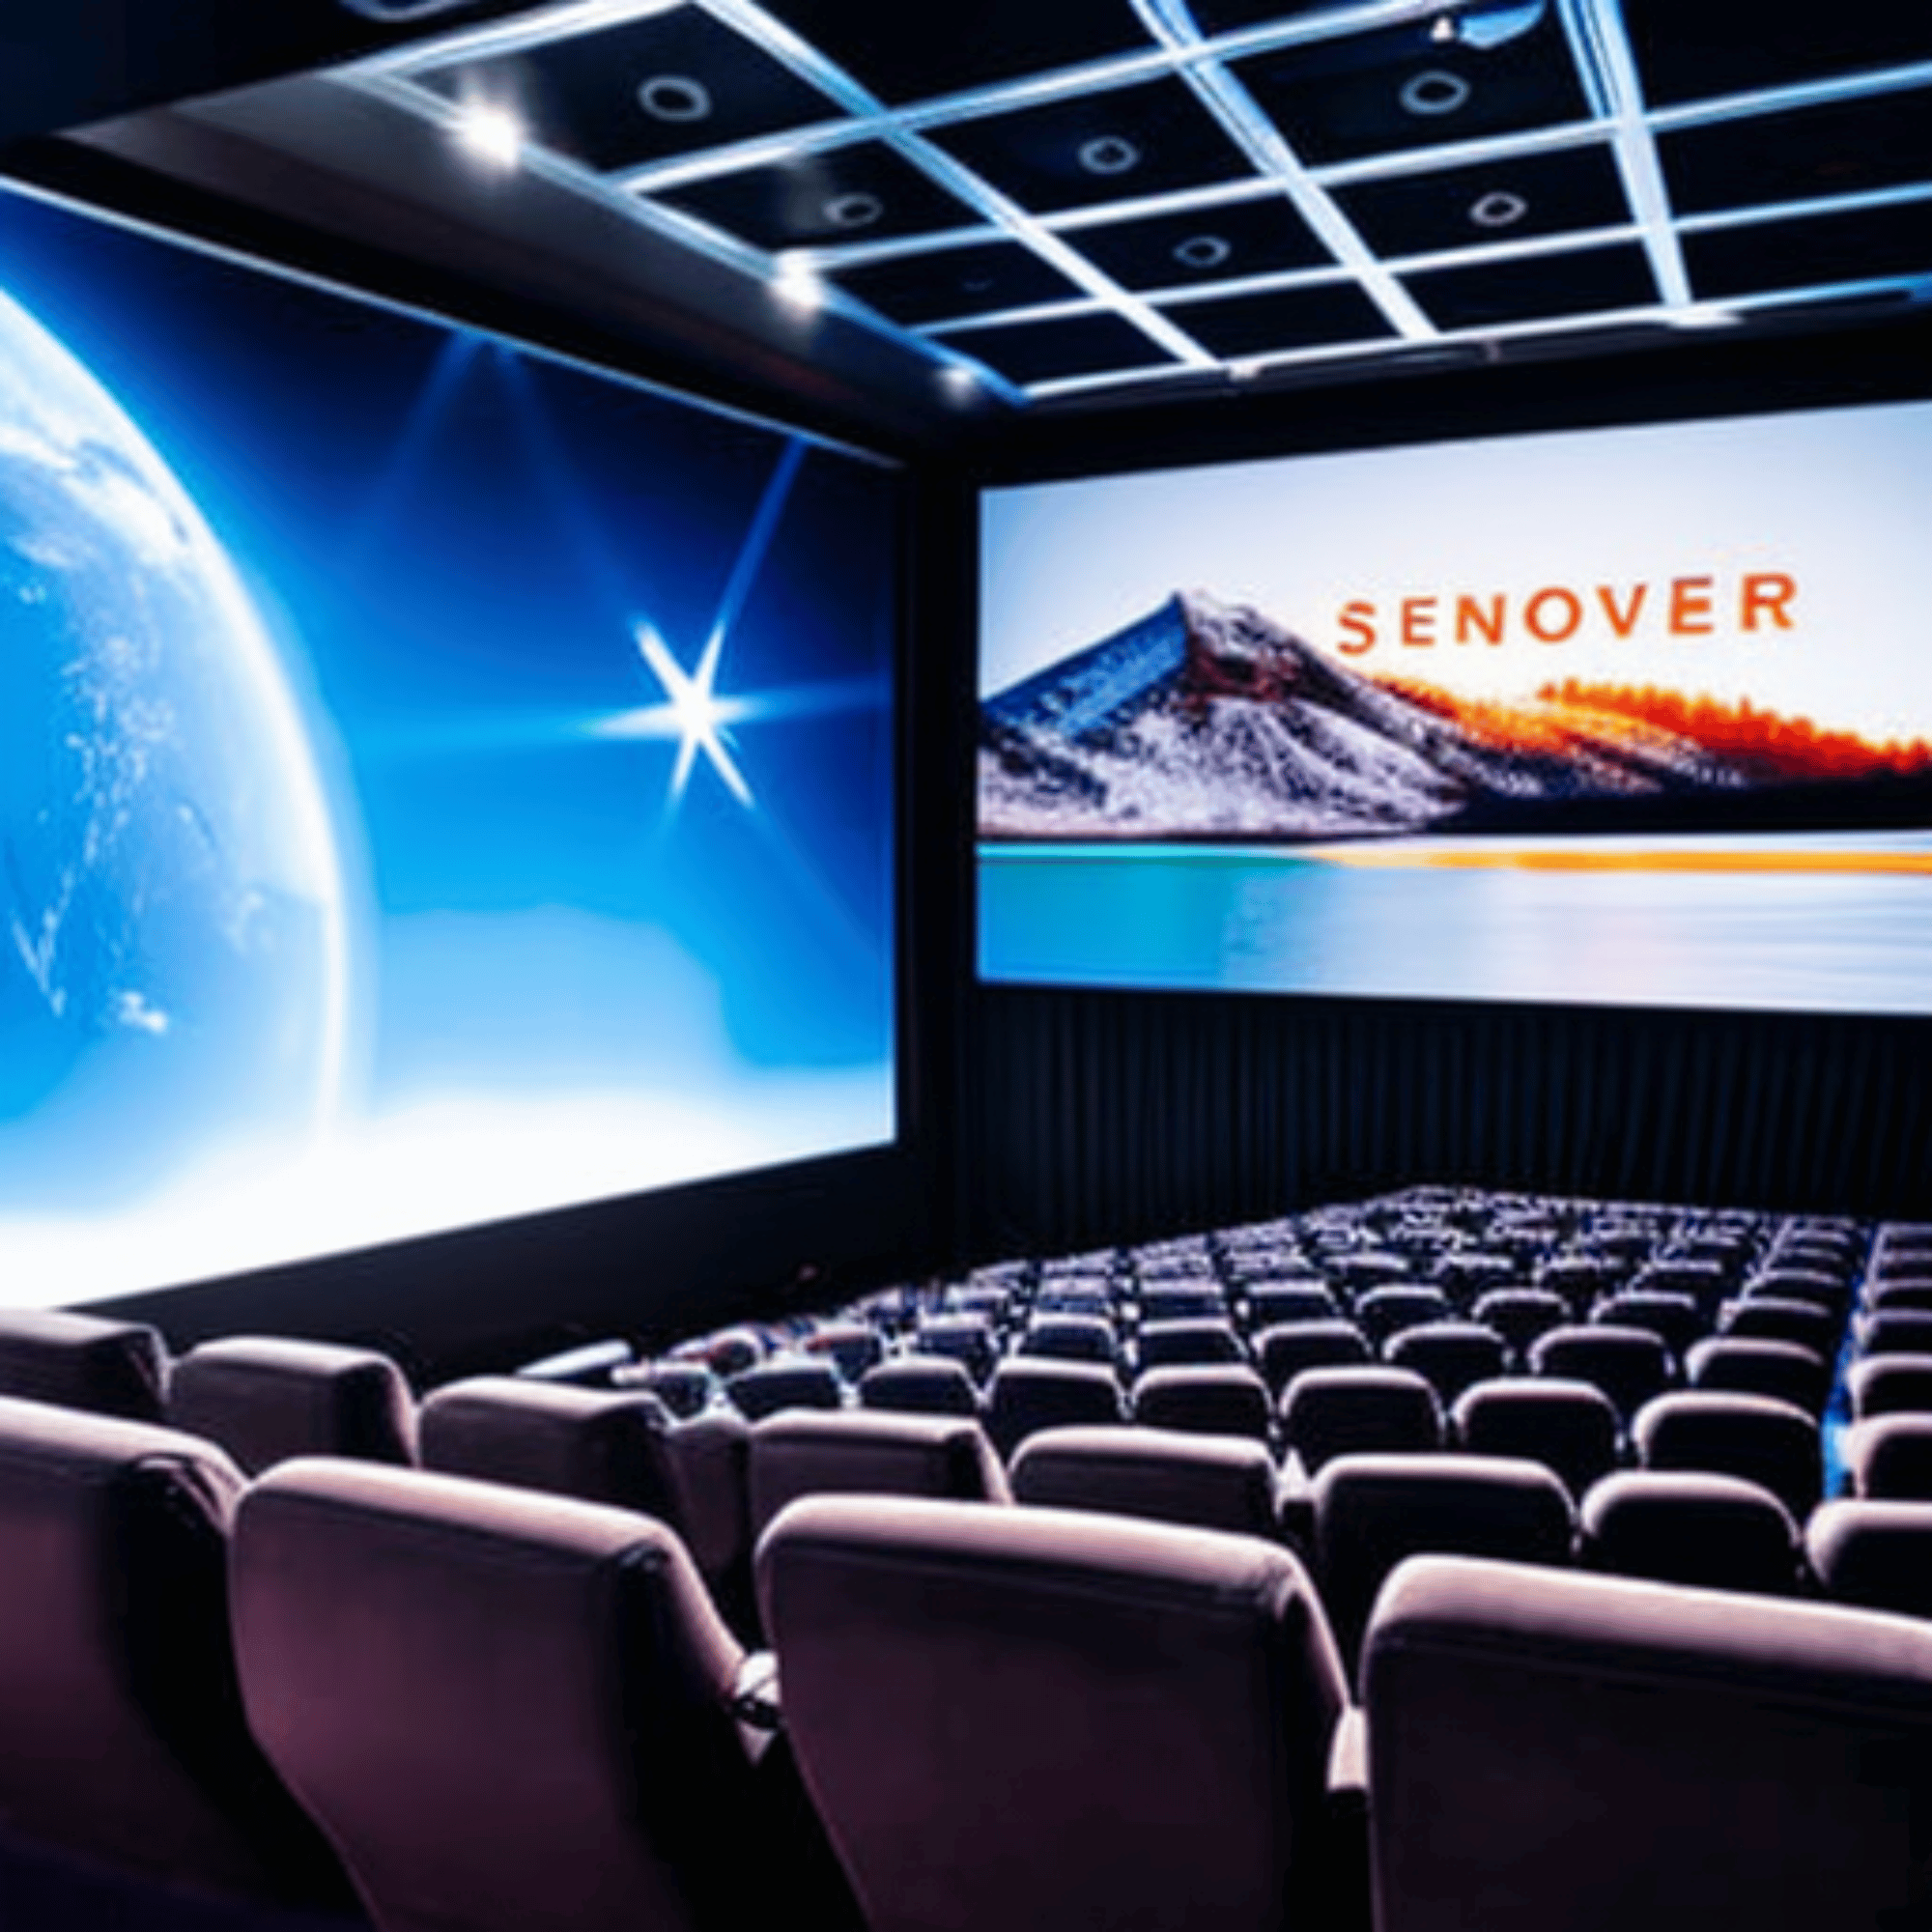 A movie theater screen showing a digital movie with futuristic visuals